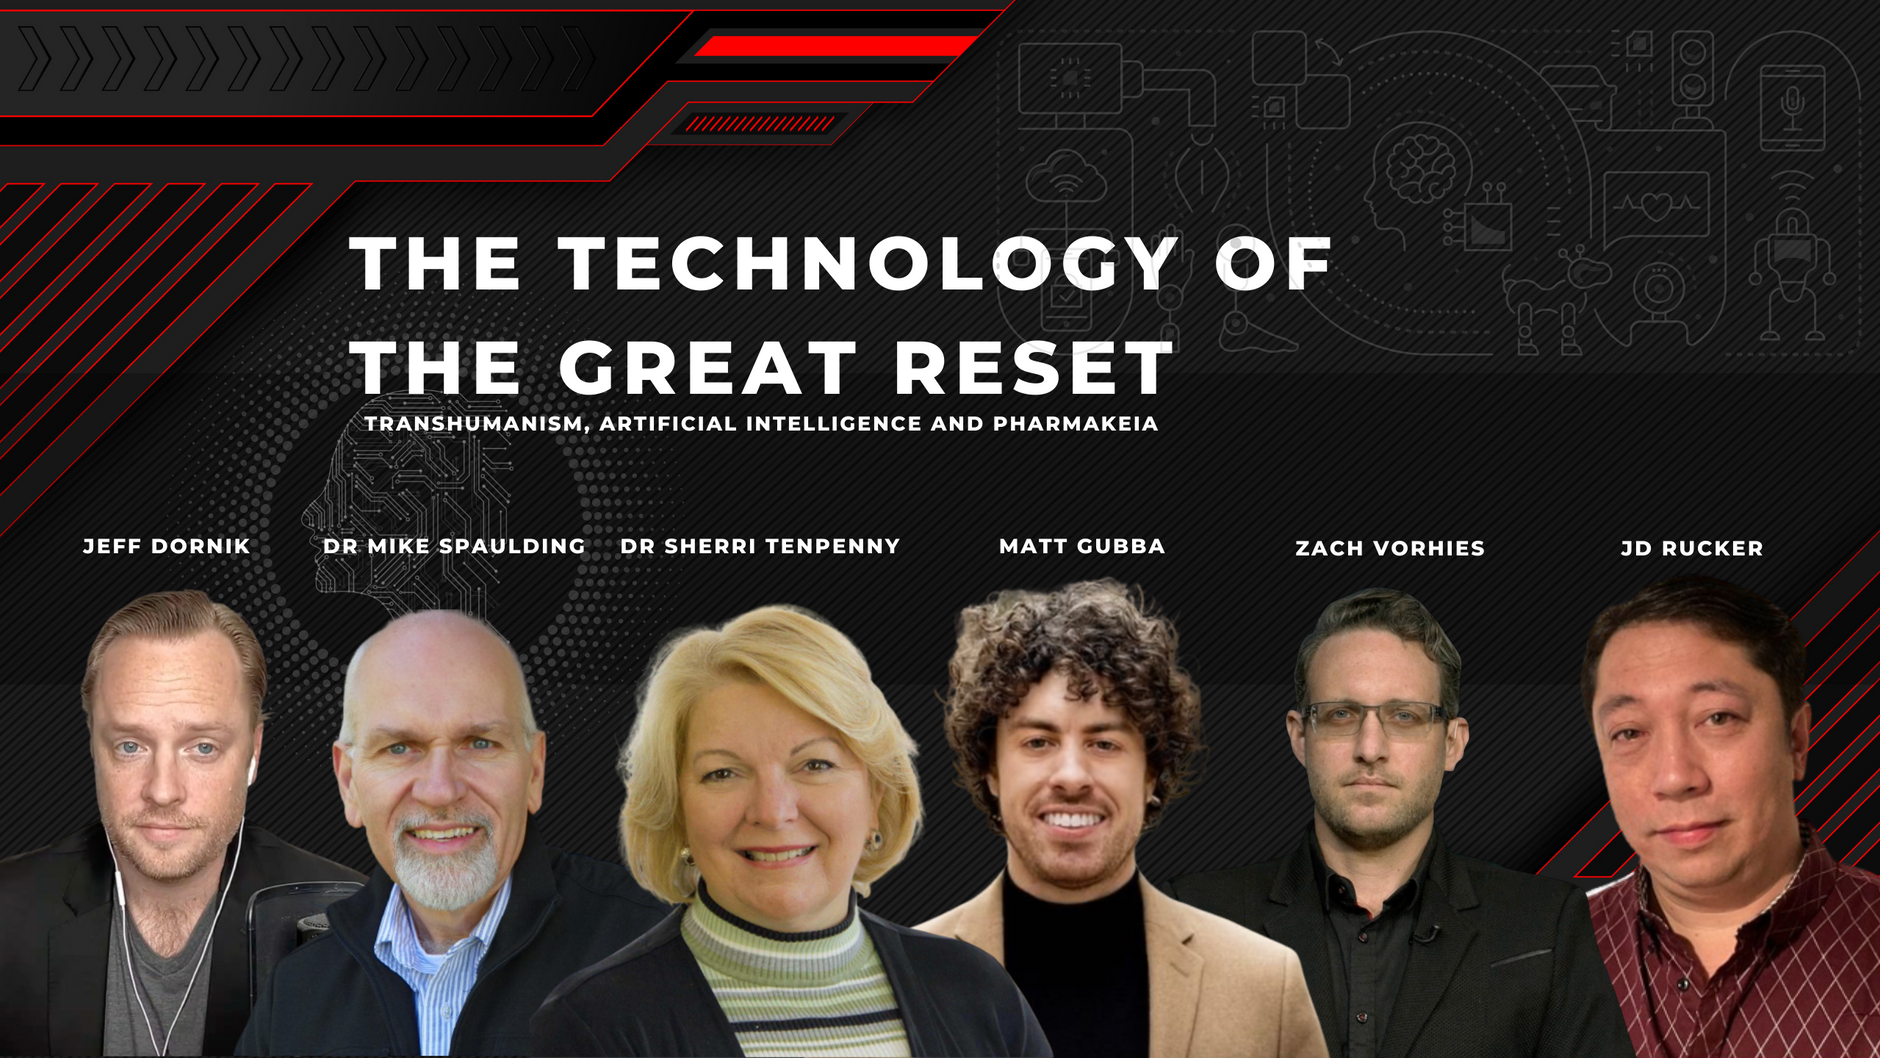 The Technology of The Great Reset